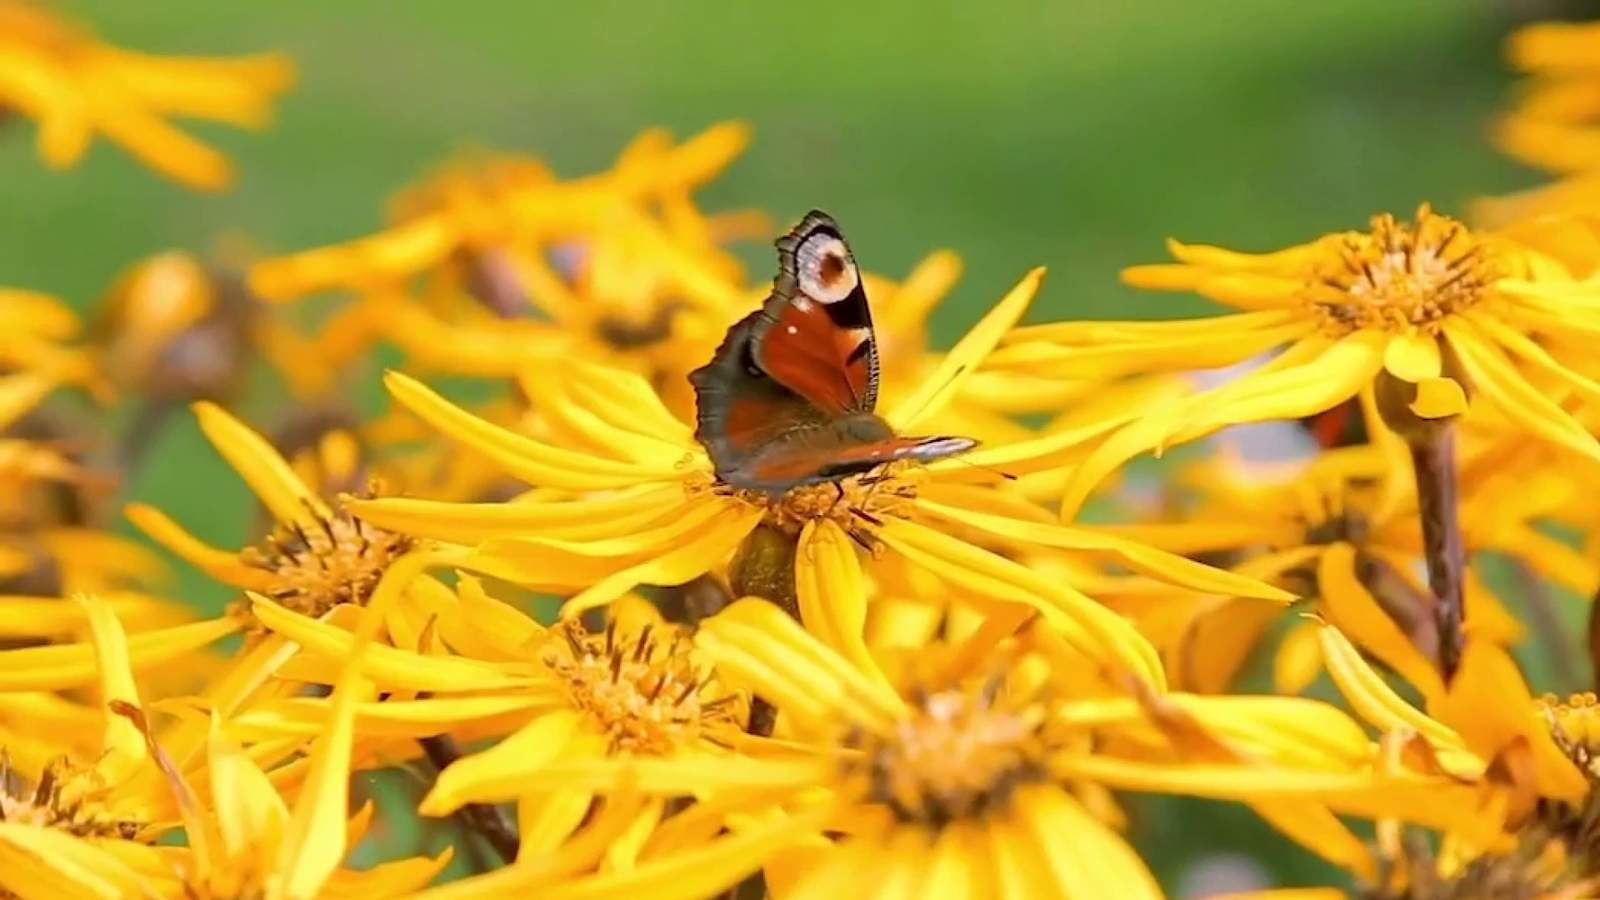 You can help save declining butterfly populations